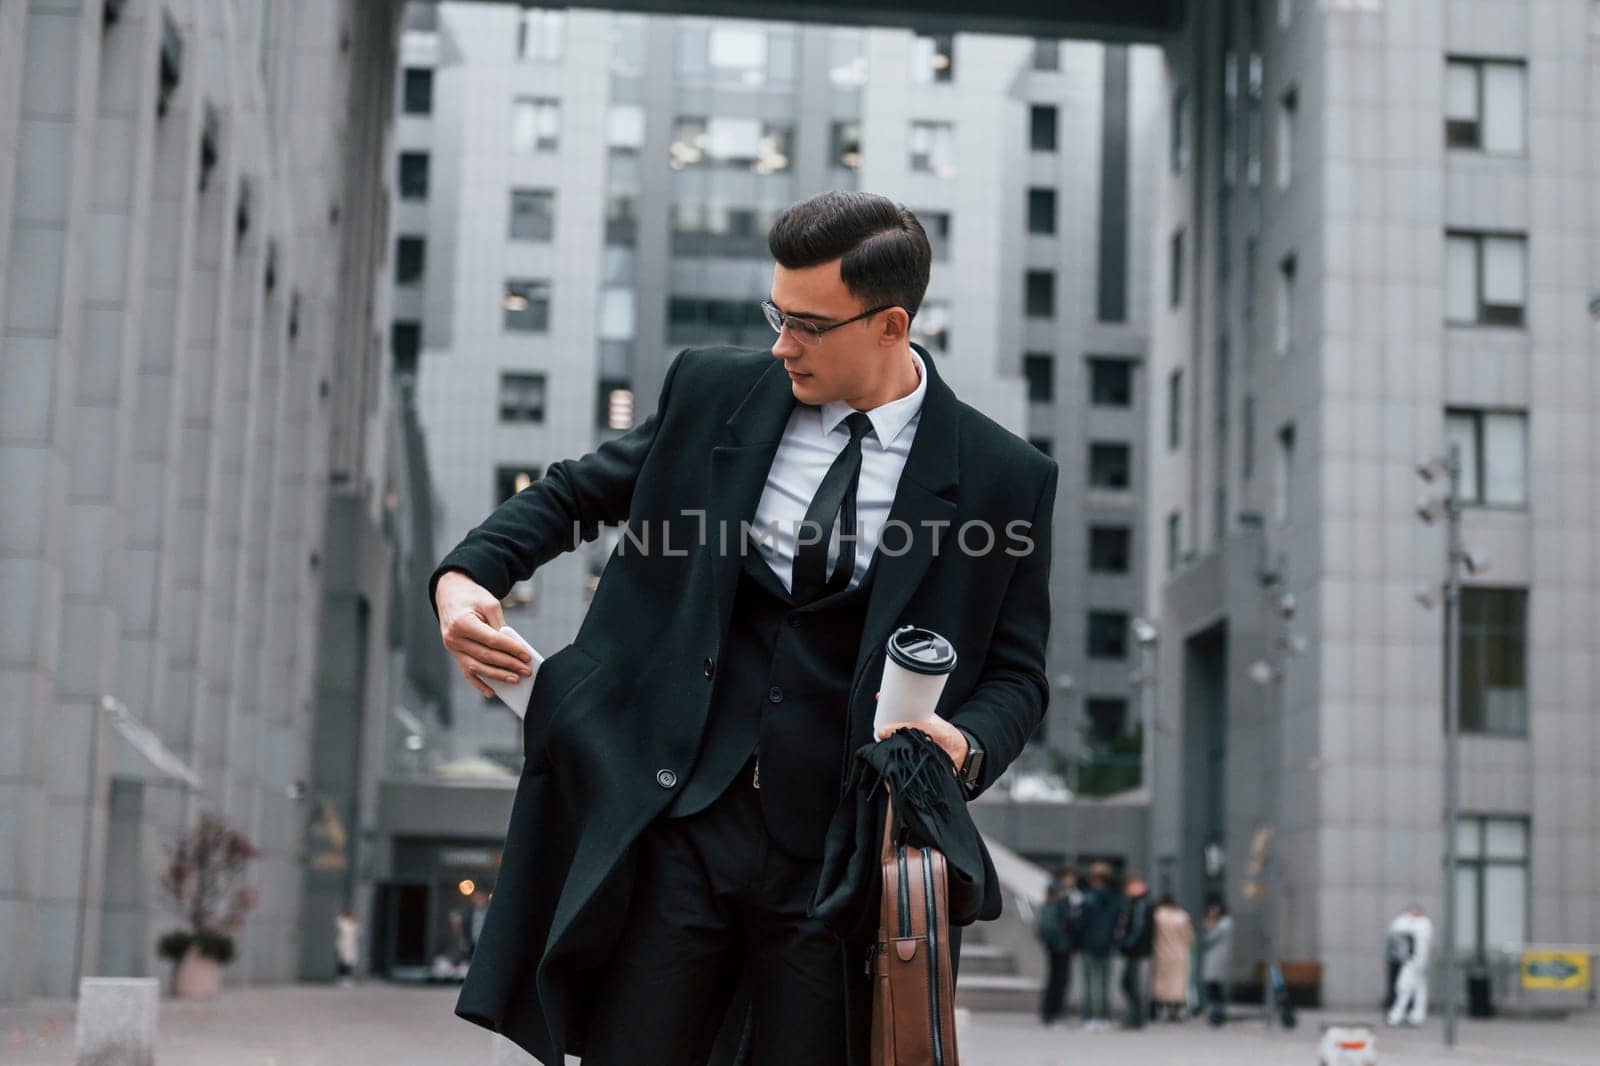 Buildings exterior. Businessman in black suit and tie is outdoors in the city.